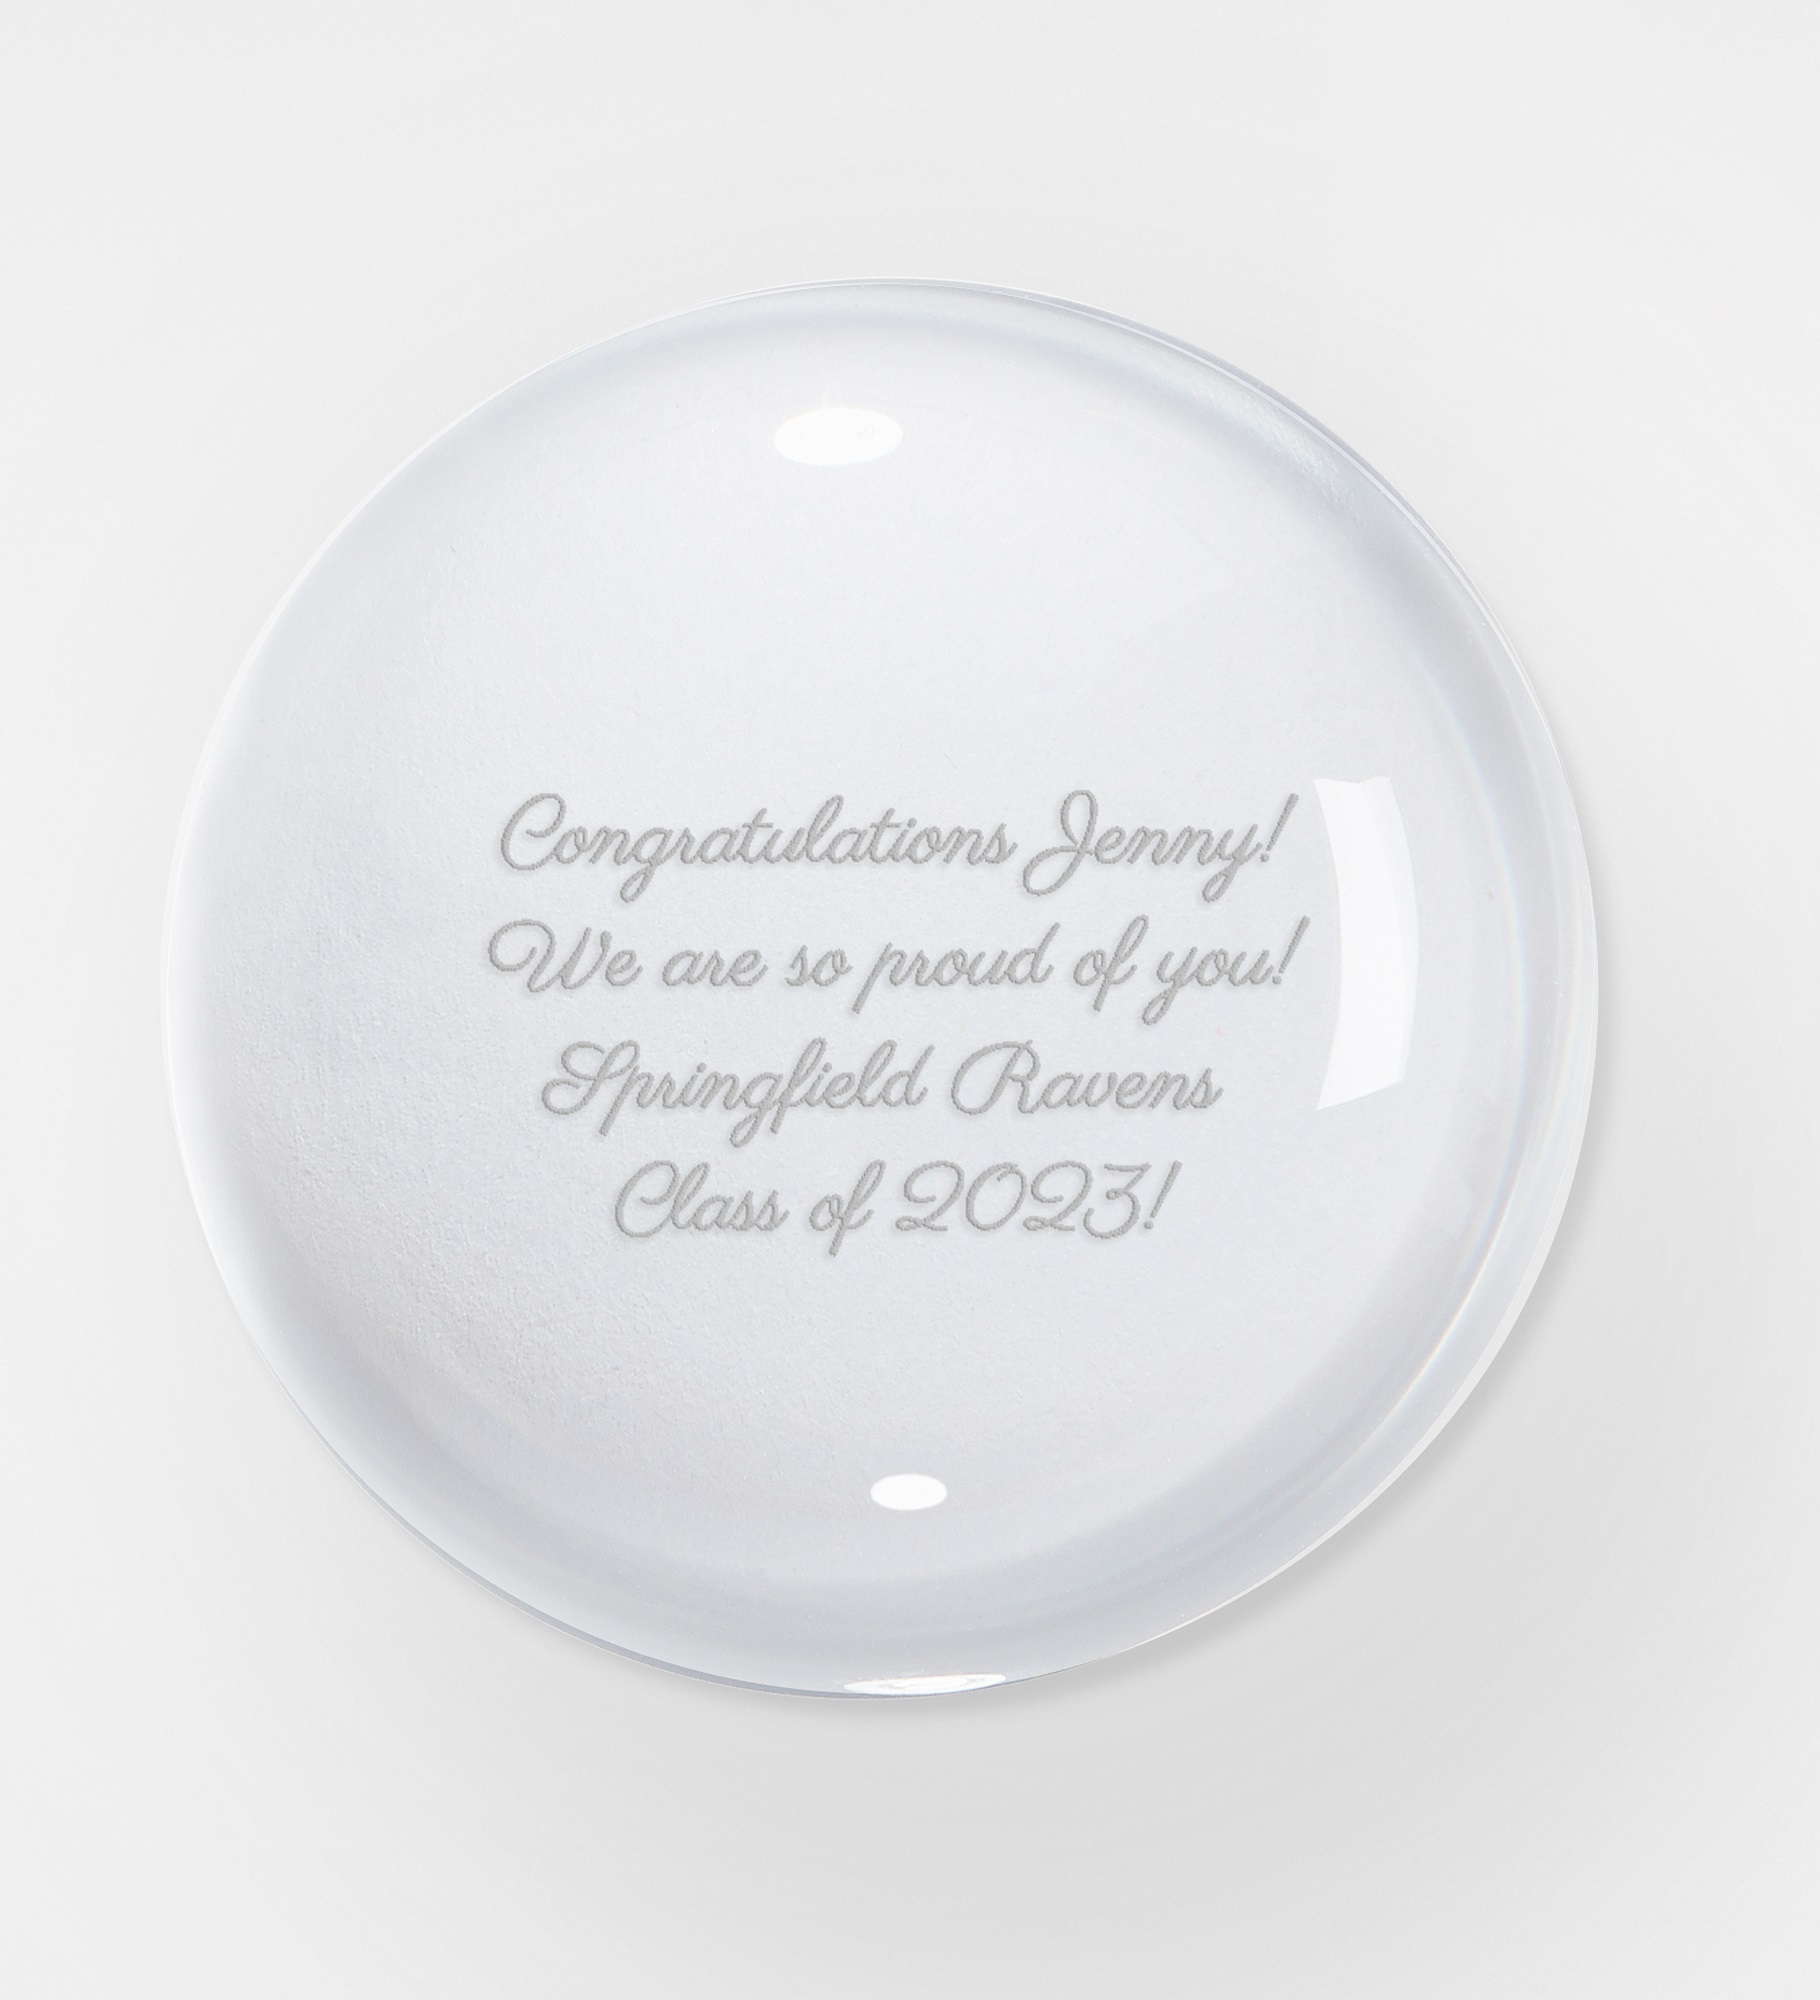  Engraved Graduation Message Crystal Paperweight